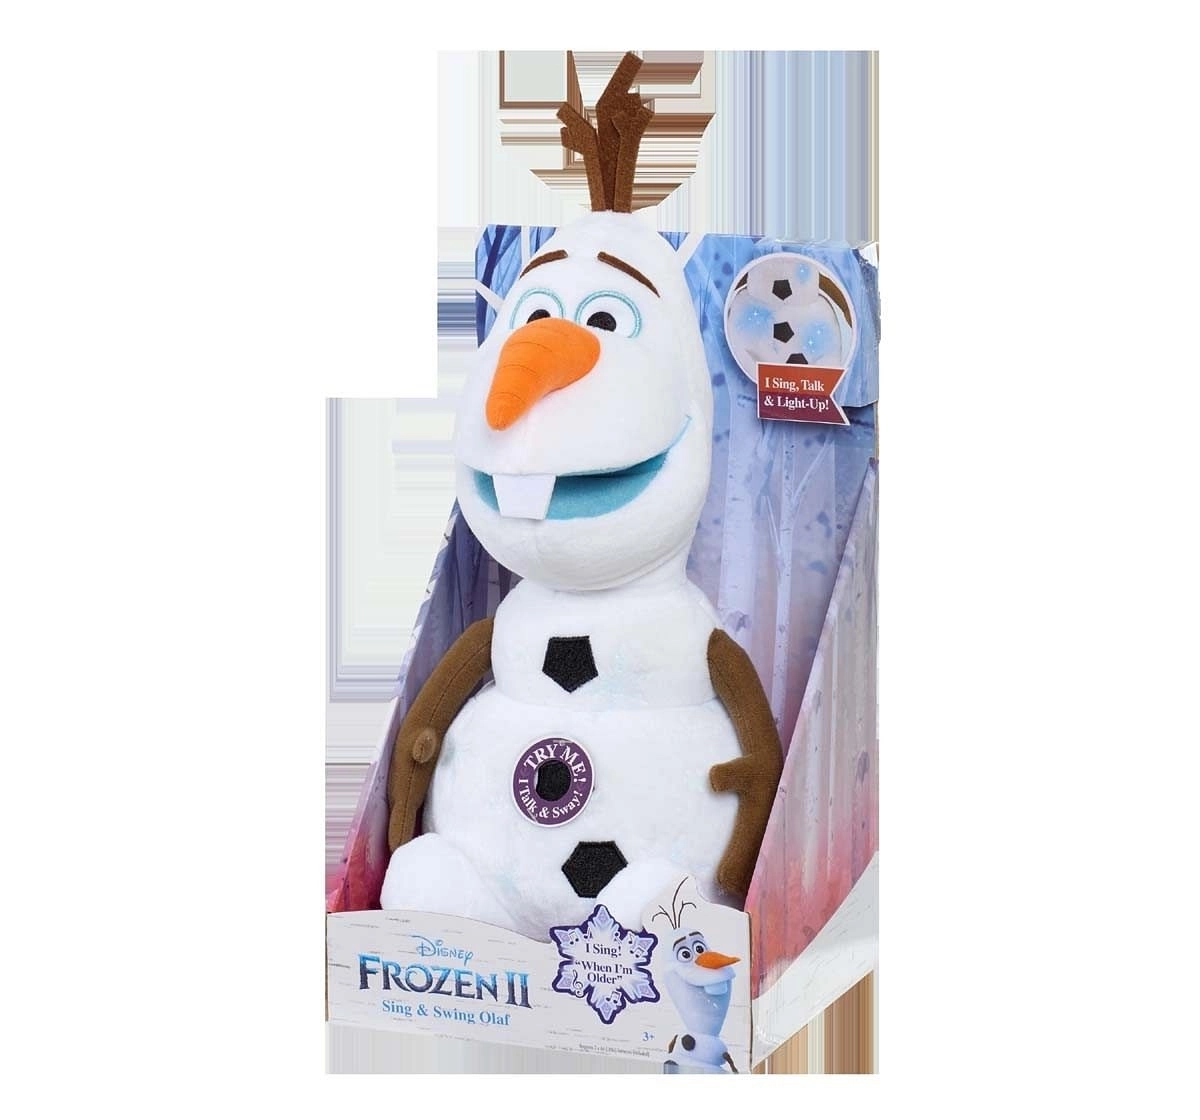 Disney Frozen 2 Sing & Swing Olaf Interactive Soft Toys for Age 3Y+ - 30.48 Cm